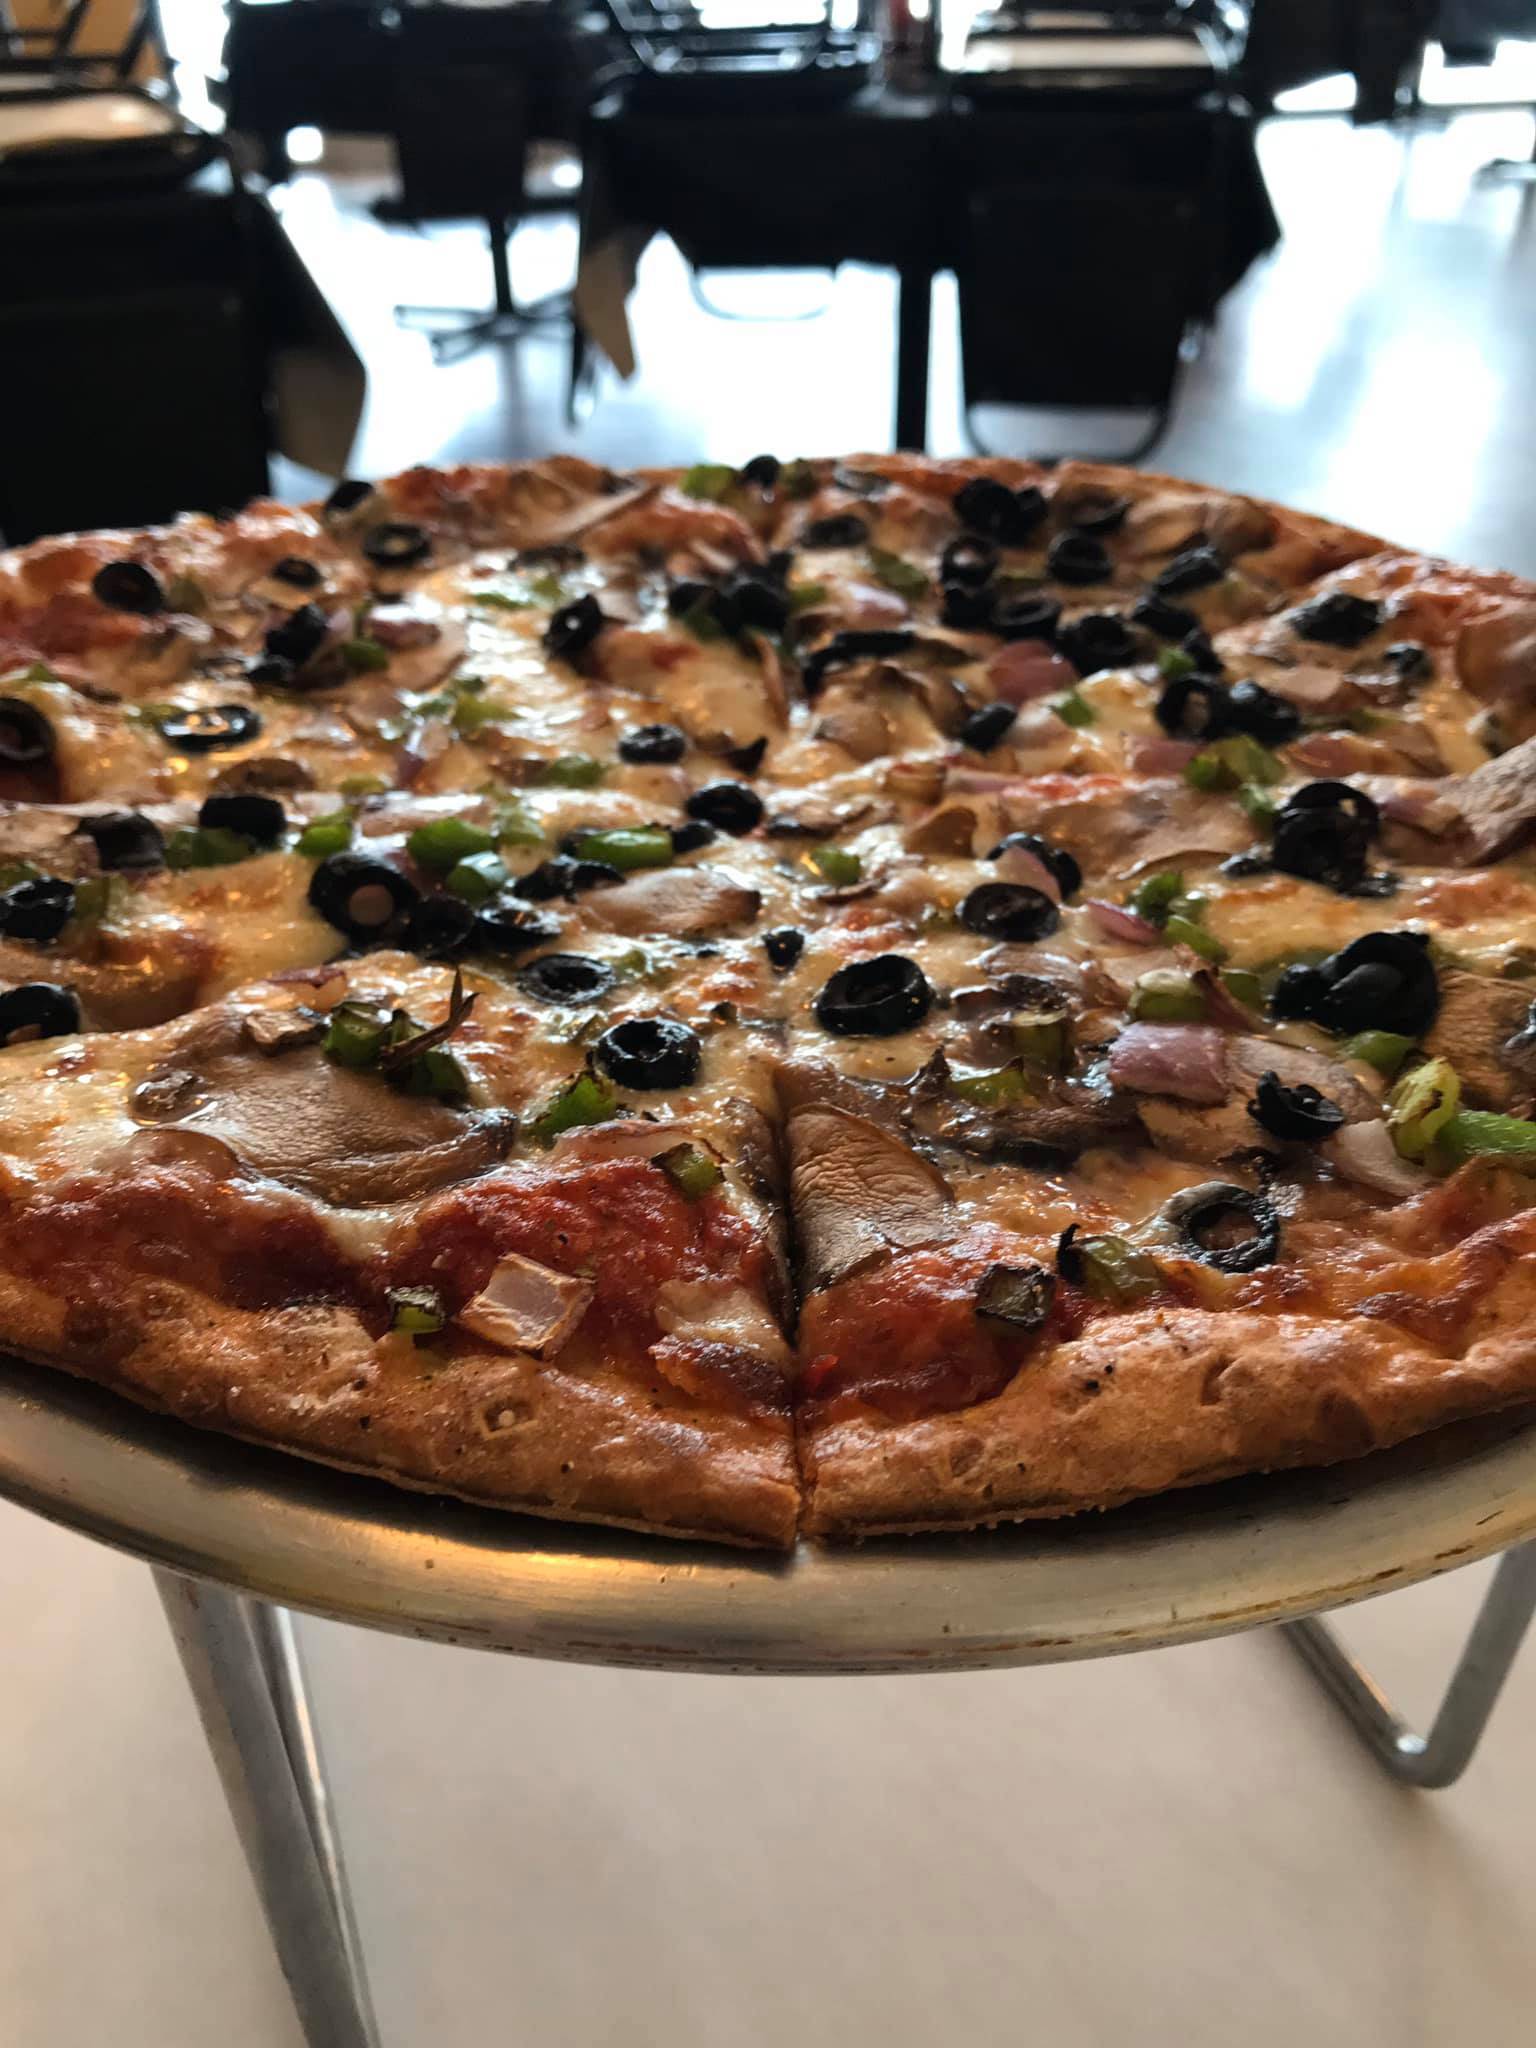 A large pizza pie with onions, green peppers, and olives is on a metal plate raised above a table. Photo from Po Boys Facebook page.